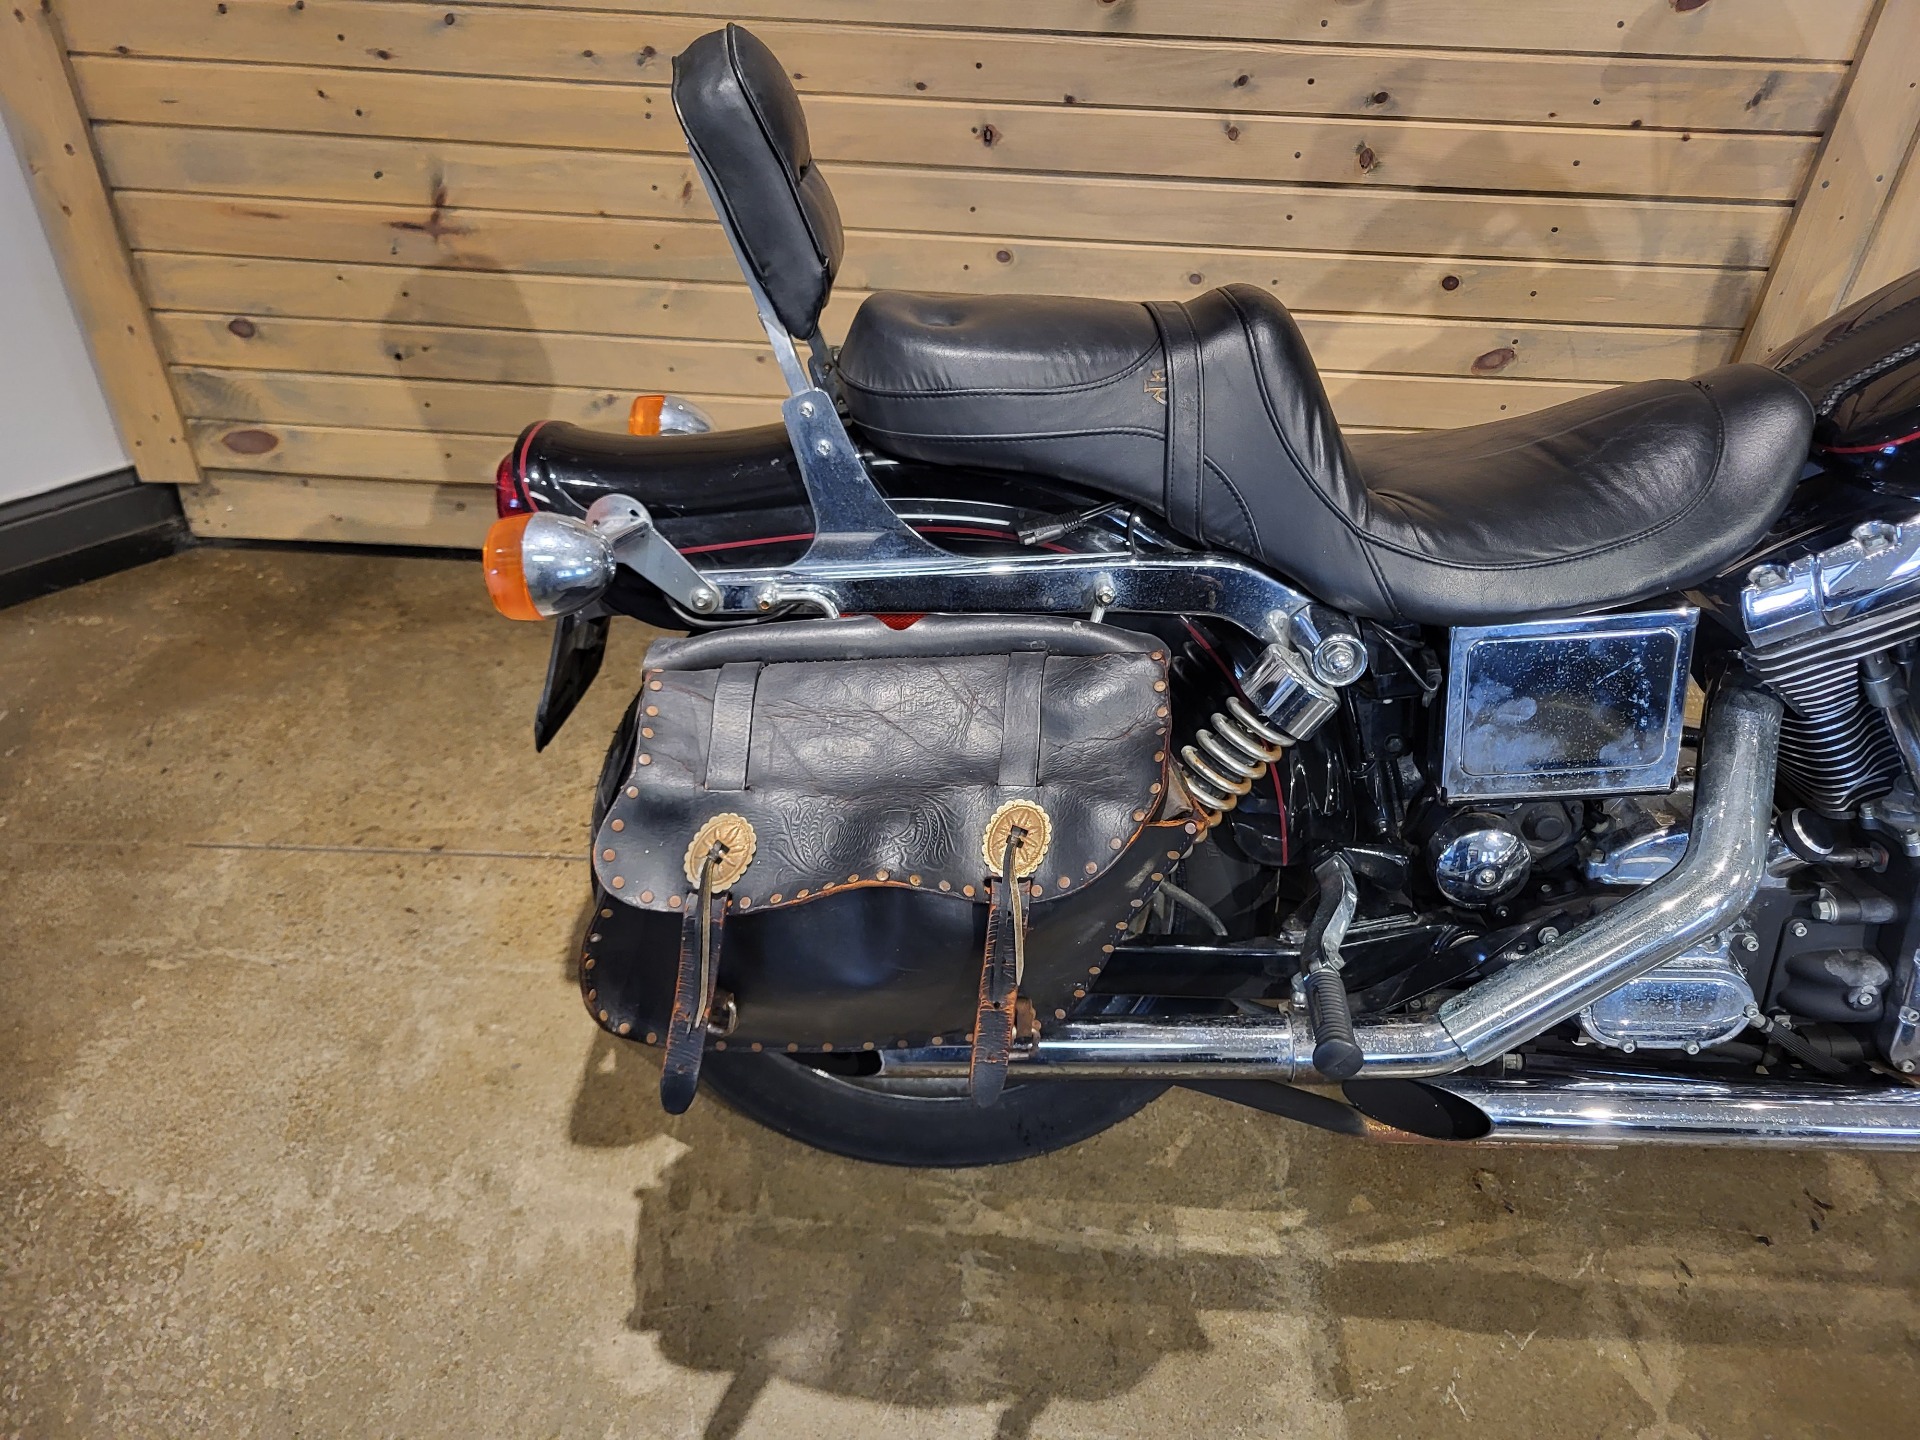 2001 Harley-Davidson FXDWG Dyna Wide Glide® in Mentor, Ohio - Photo 3